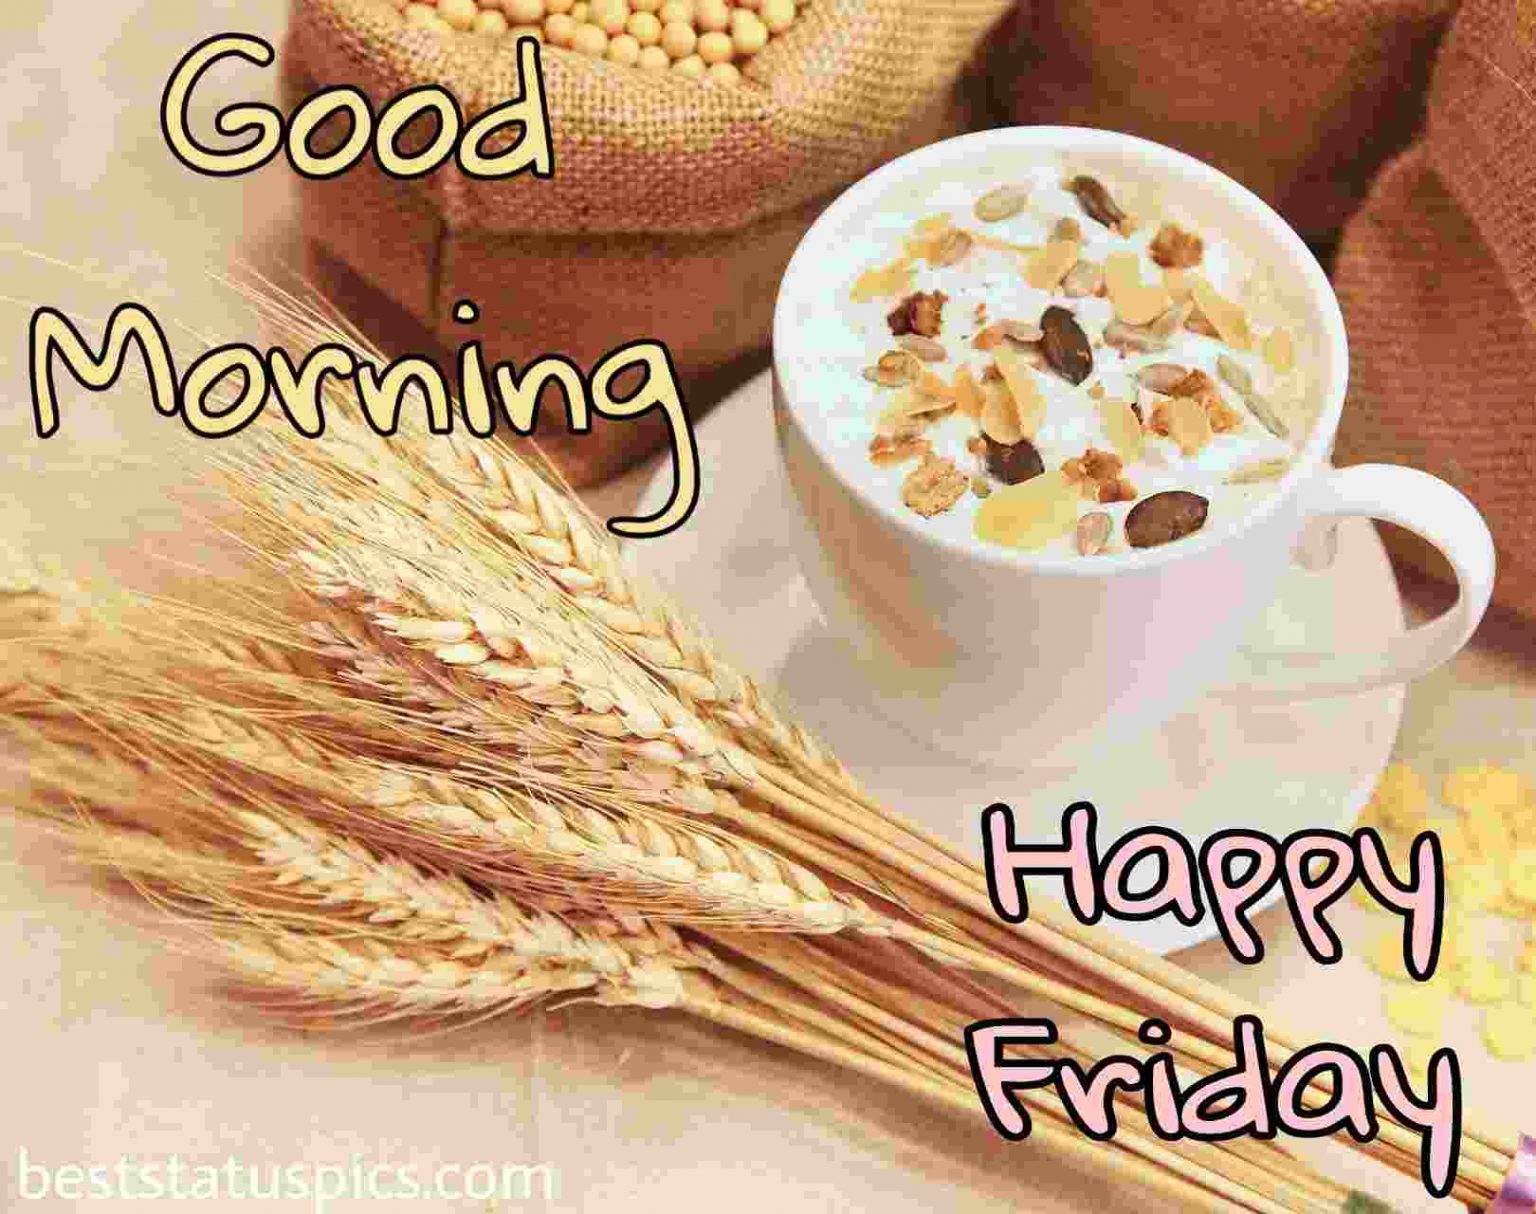 Good Morning Happy Friday Messages